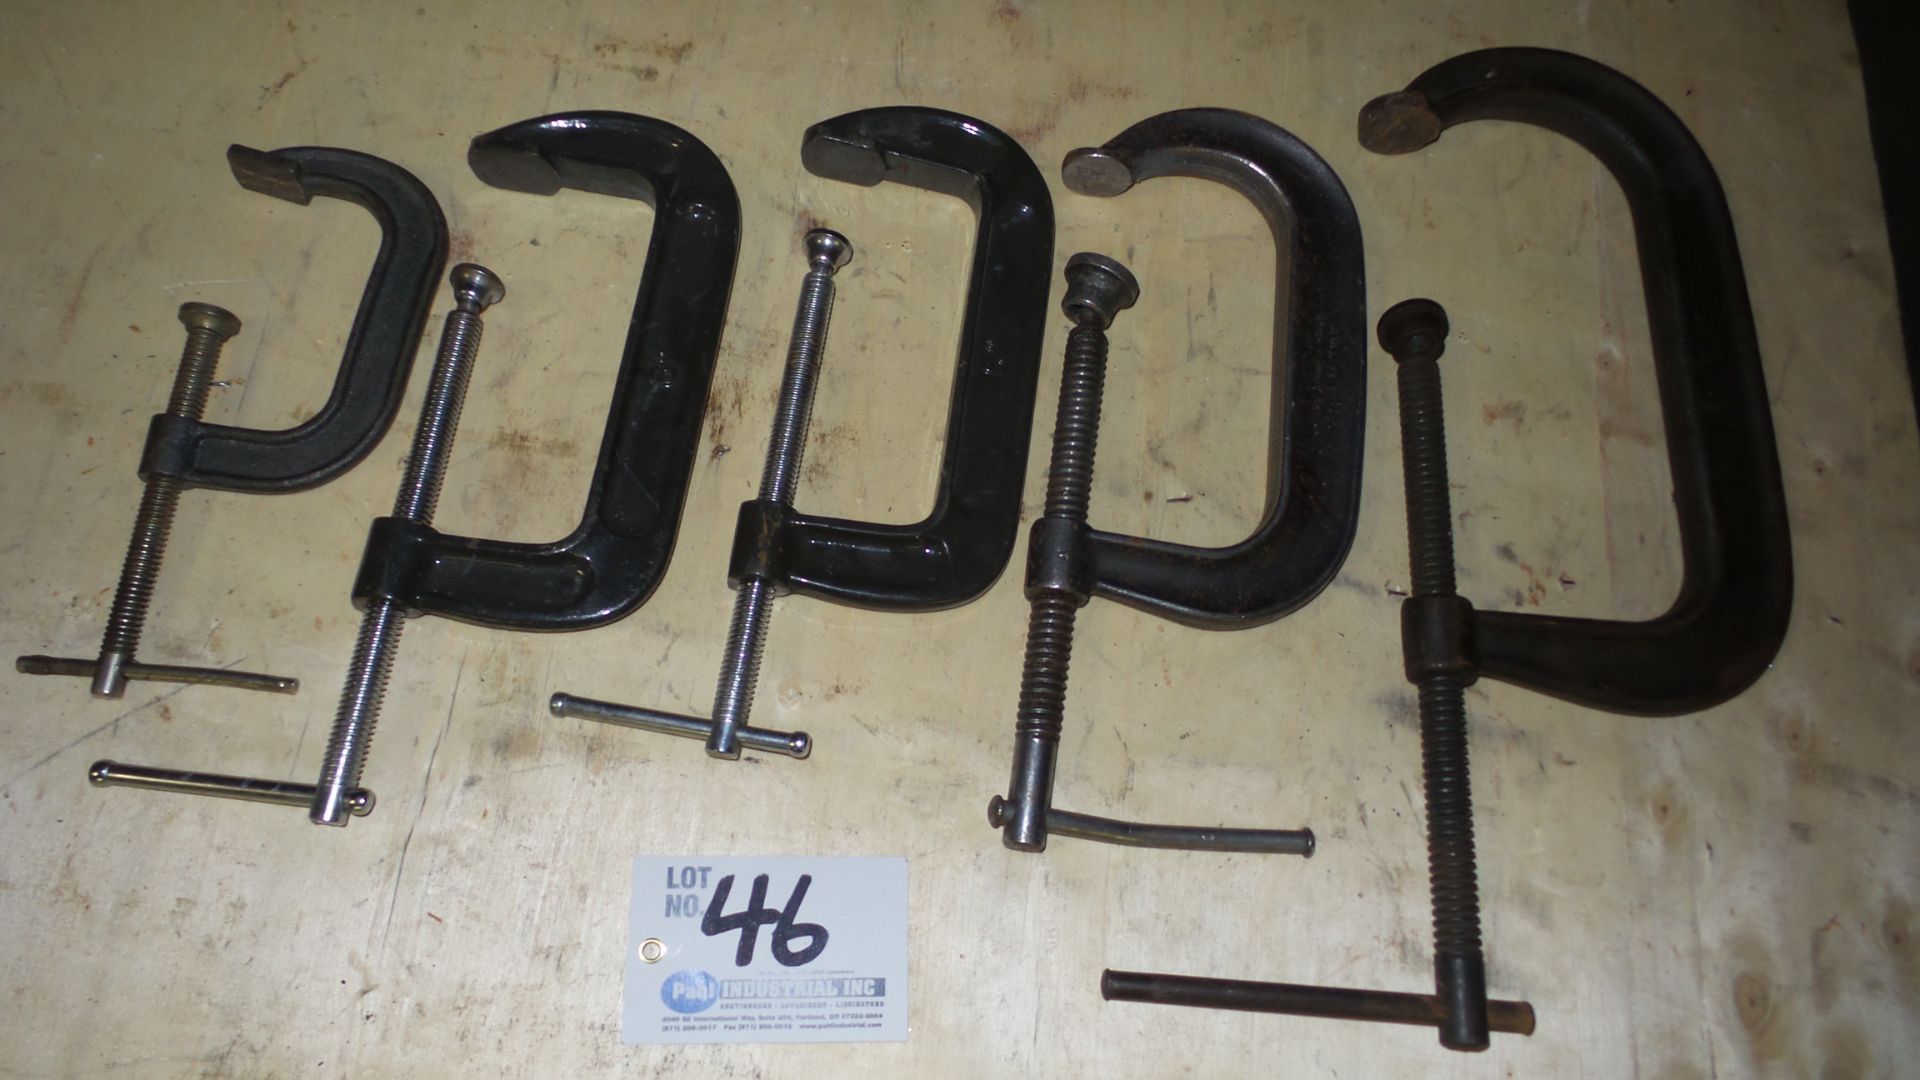 Assorted C-Clamps 4"" - 9""